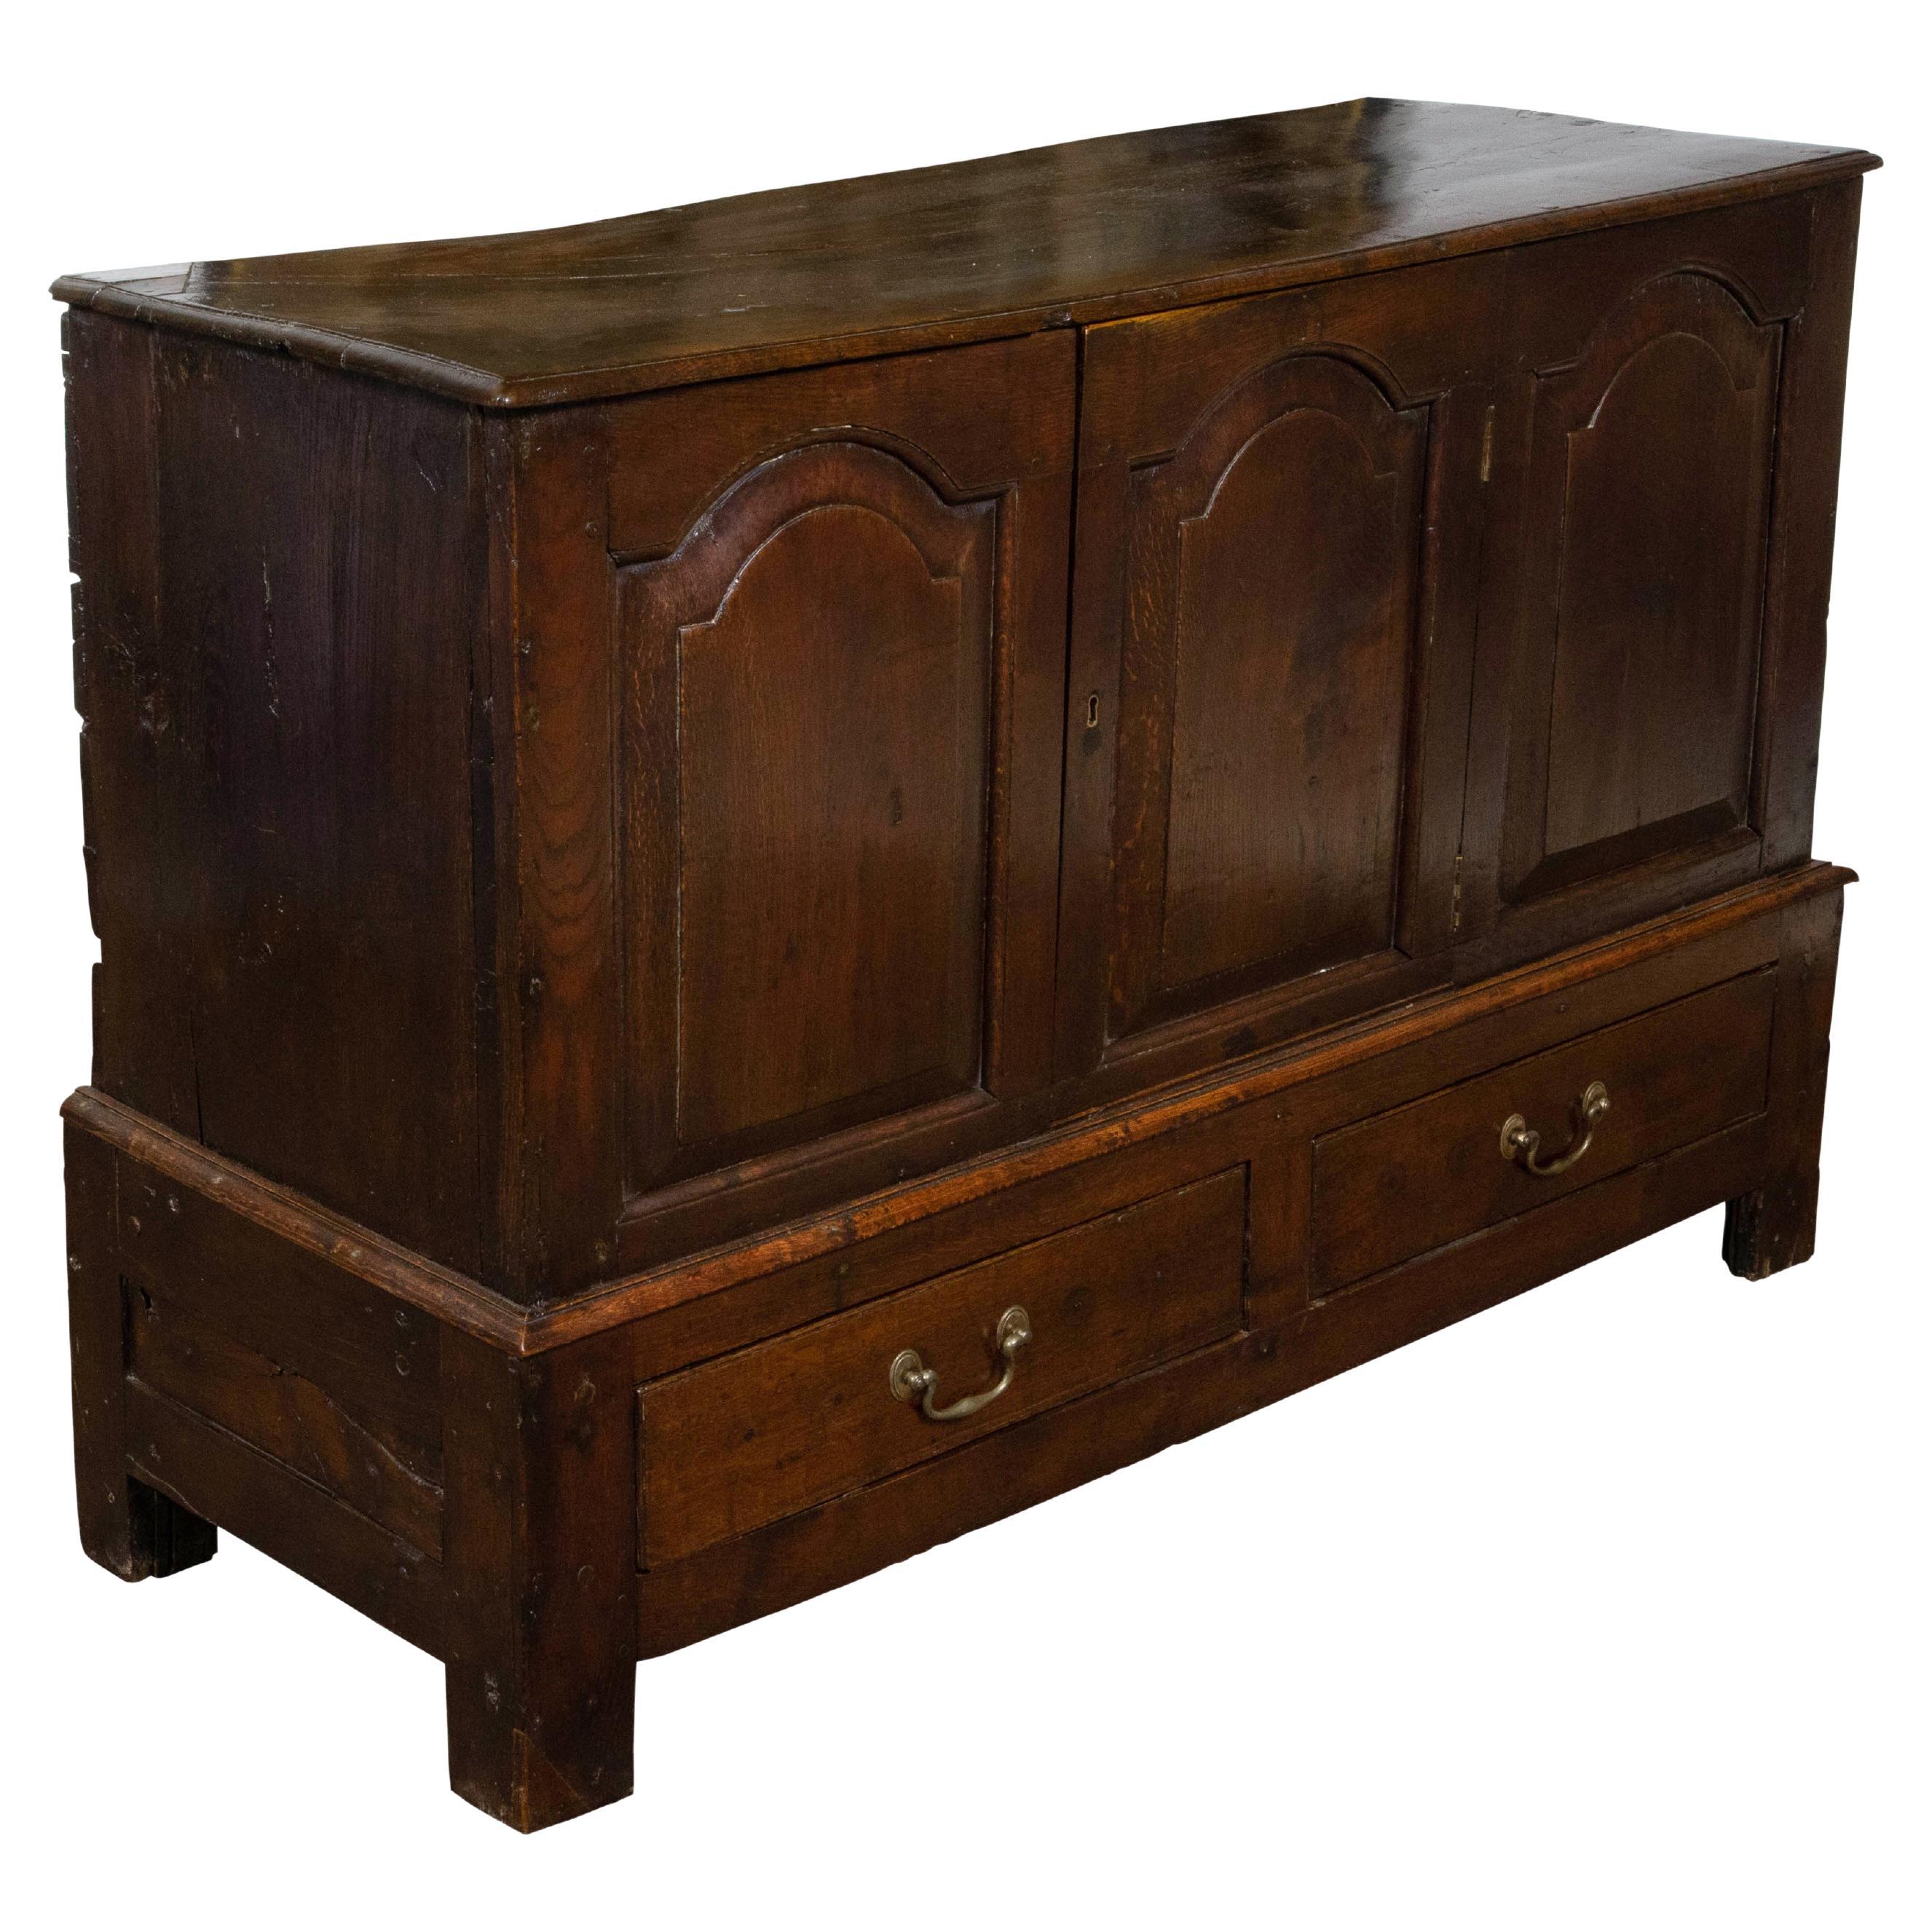 English Georgian Period 18th Century Oak Buffet with Carved Arching Doors For Sale